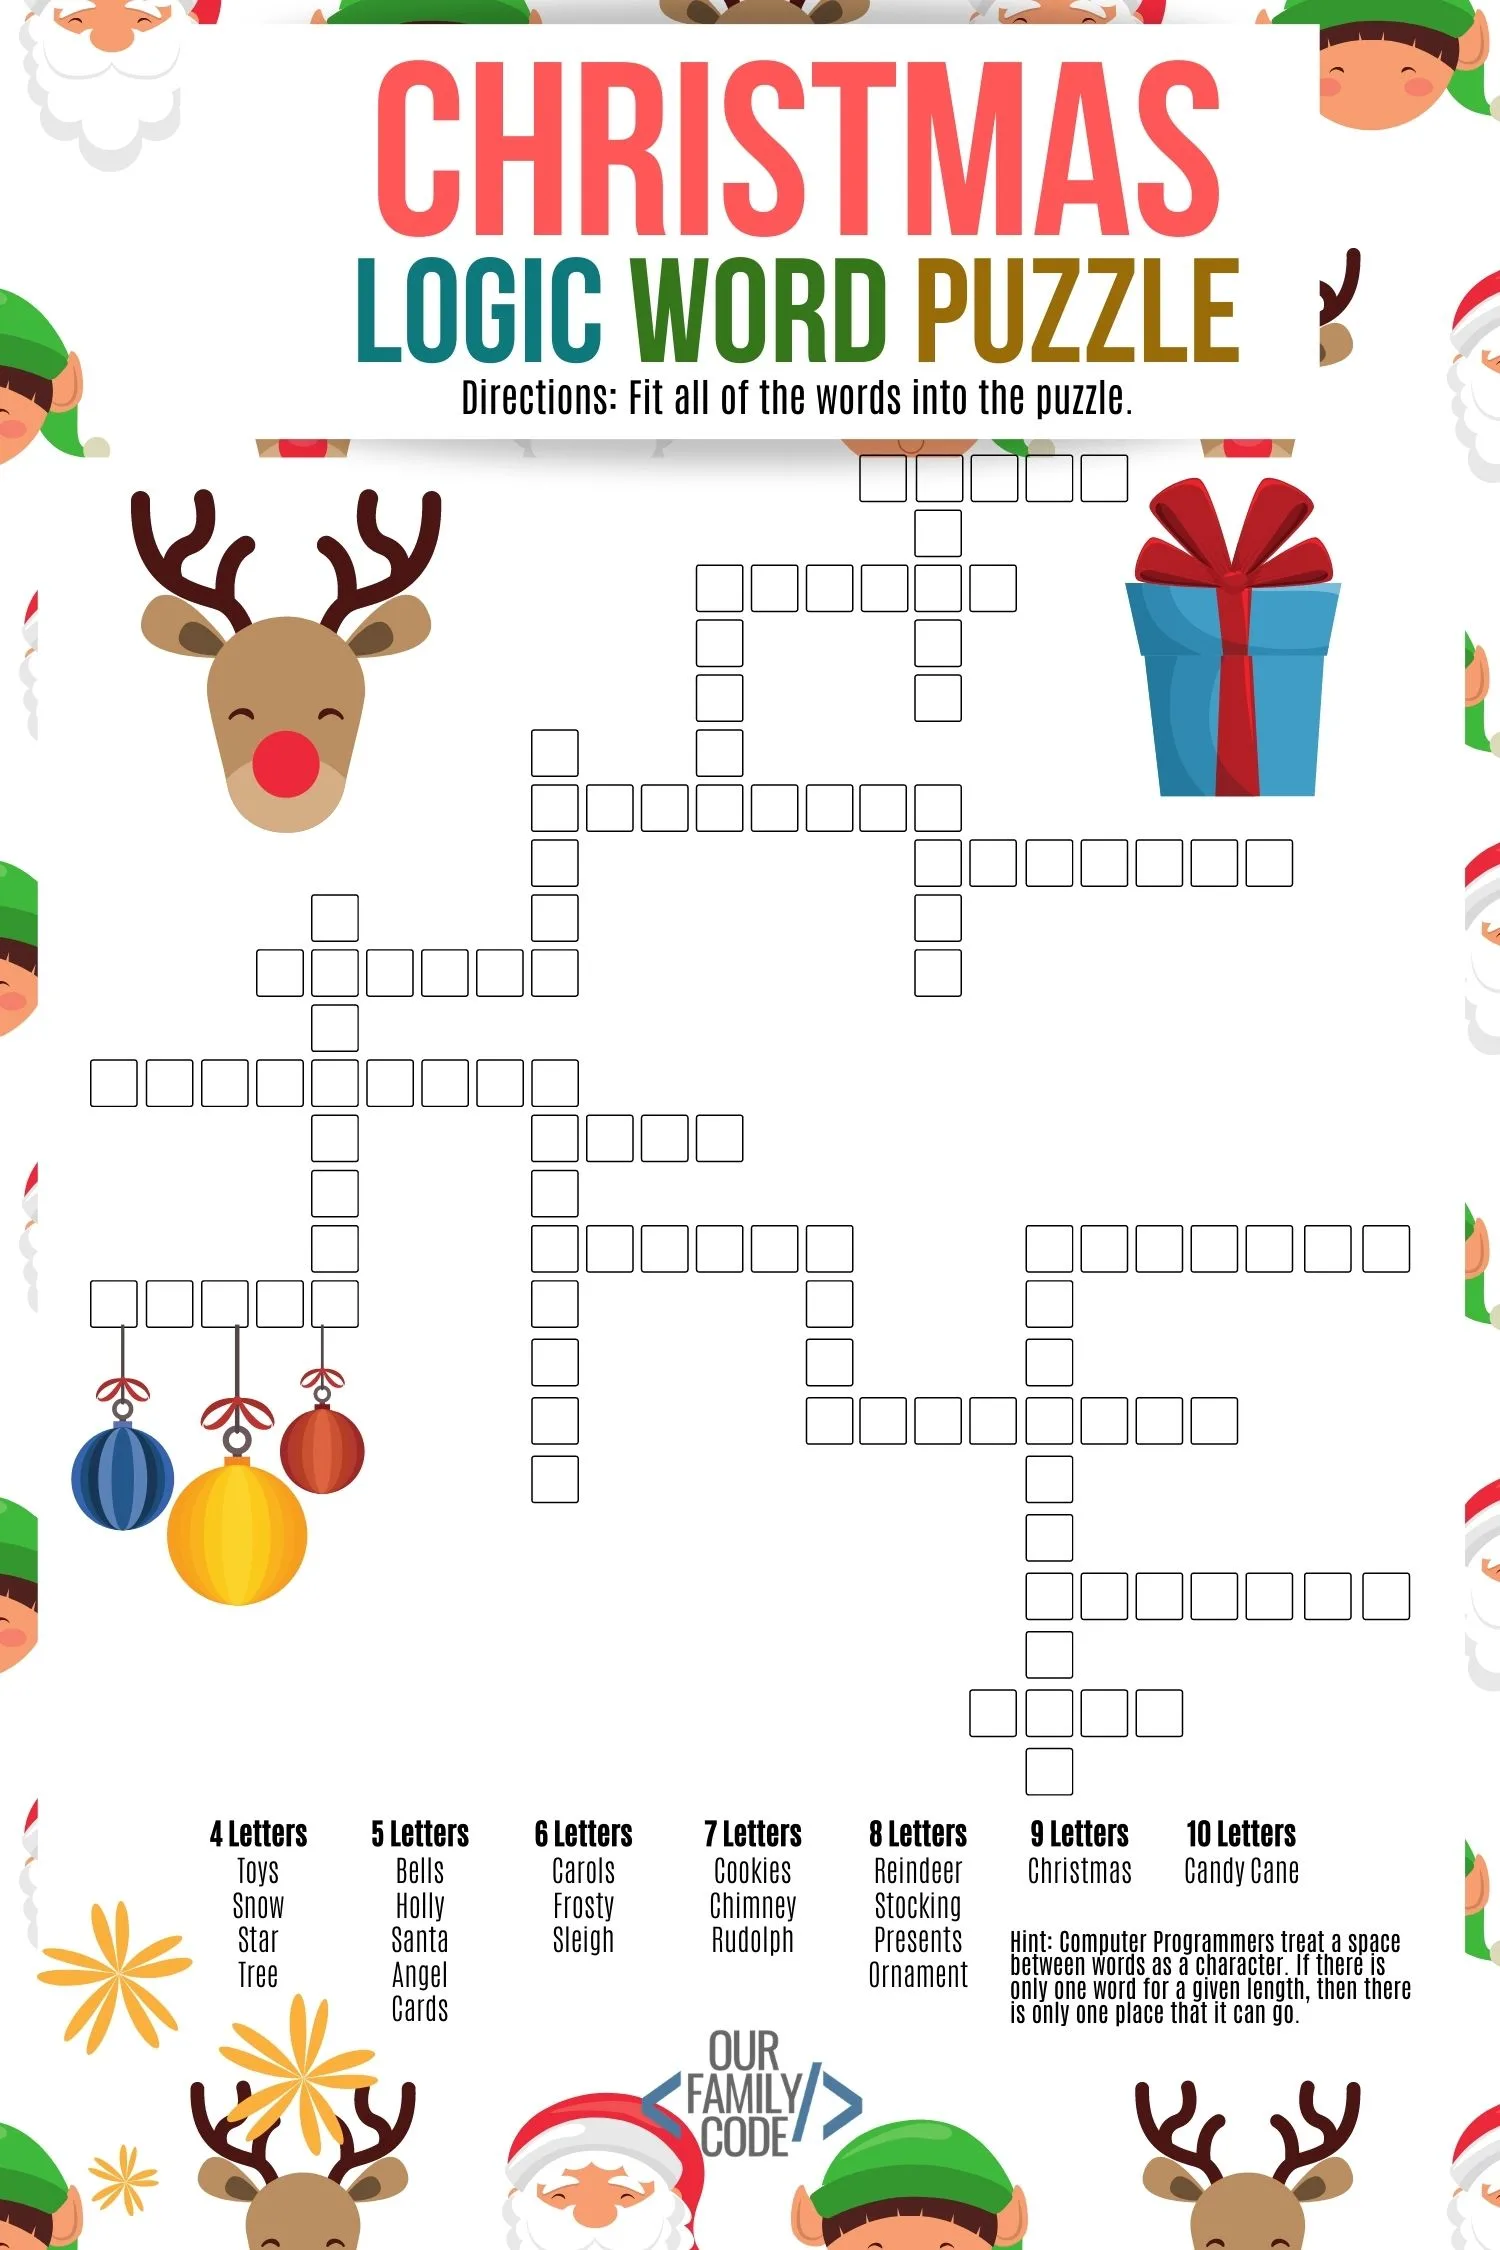 A picture of a Christmas logic word puzzle.